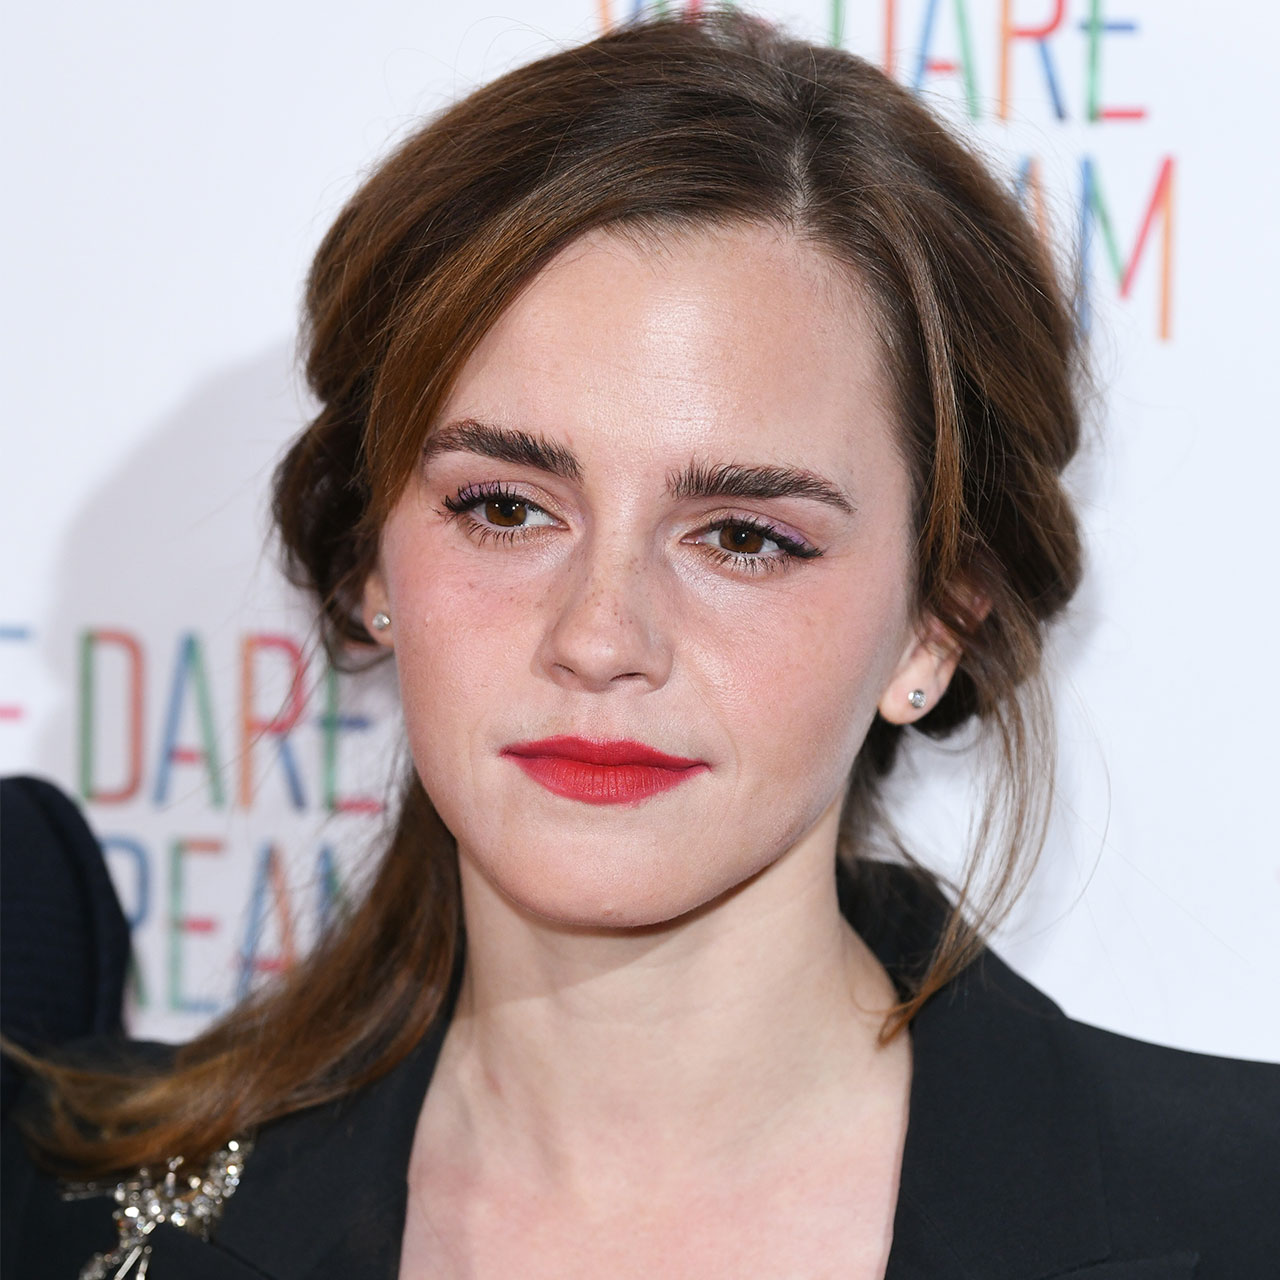 Emma Watson Gets Risqué On The Red Carpet In A Dainty Bralette Under A Chic  Black Blazer - SHEfinds